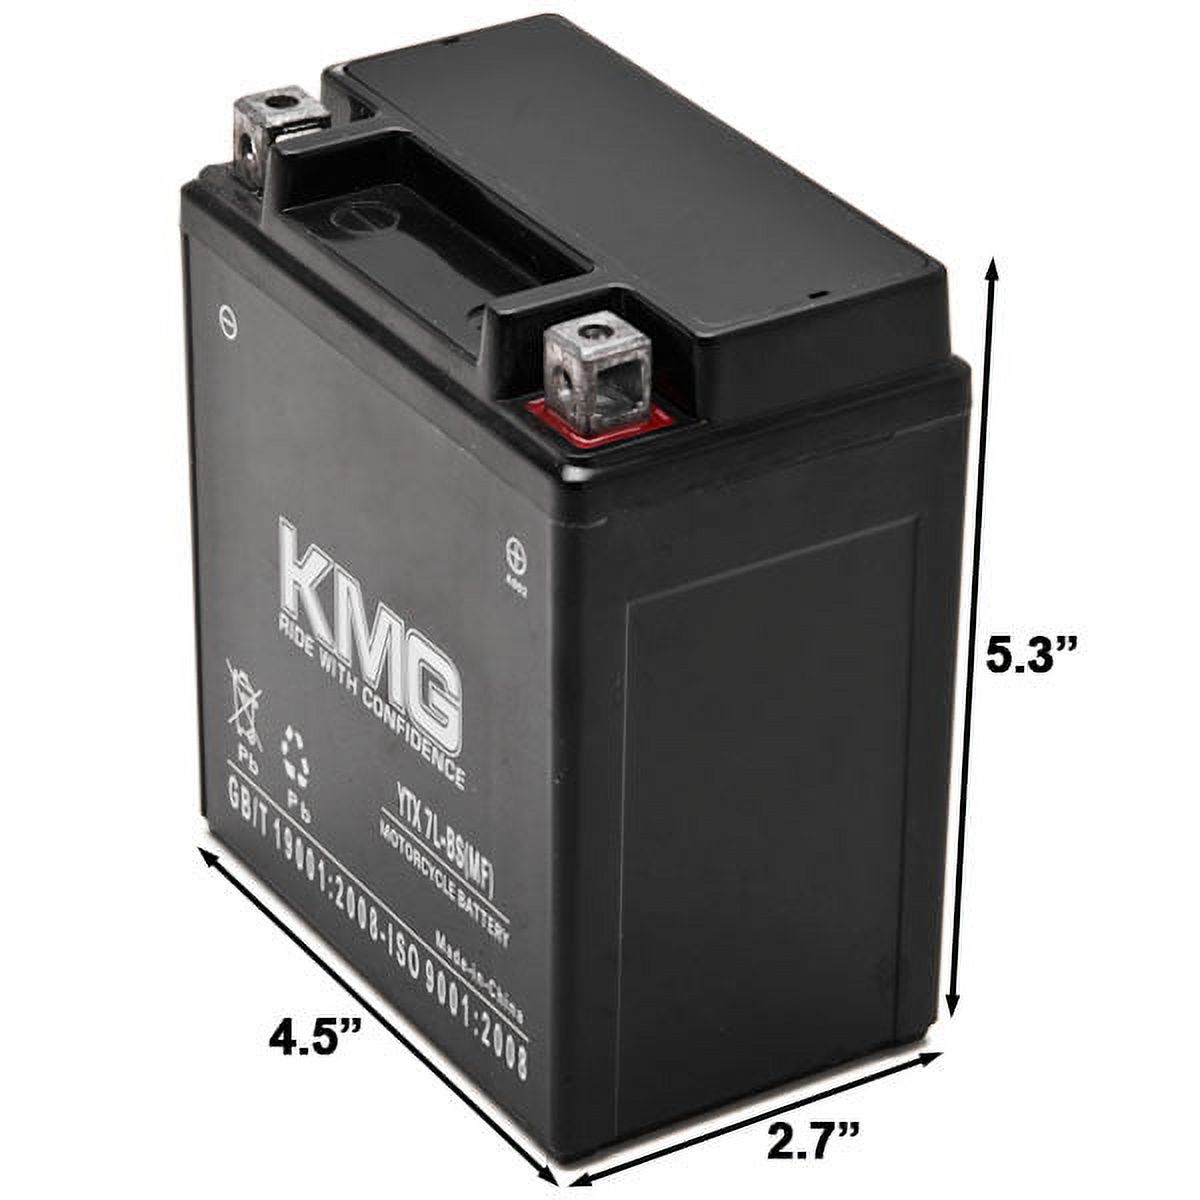 KMG 12V Battery Compatible with Honda 250 CMX250C Rebel 1996-2011 YTX7L-BS Sealed Maintenance Free Battery High Performance 12V SMF Replacement Powersport Battery - image 3 of 3